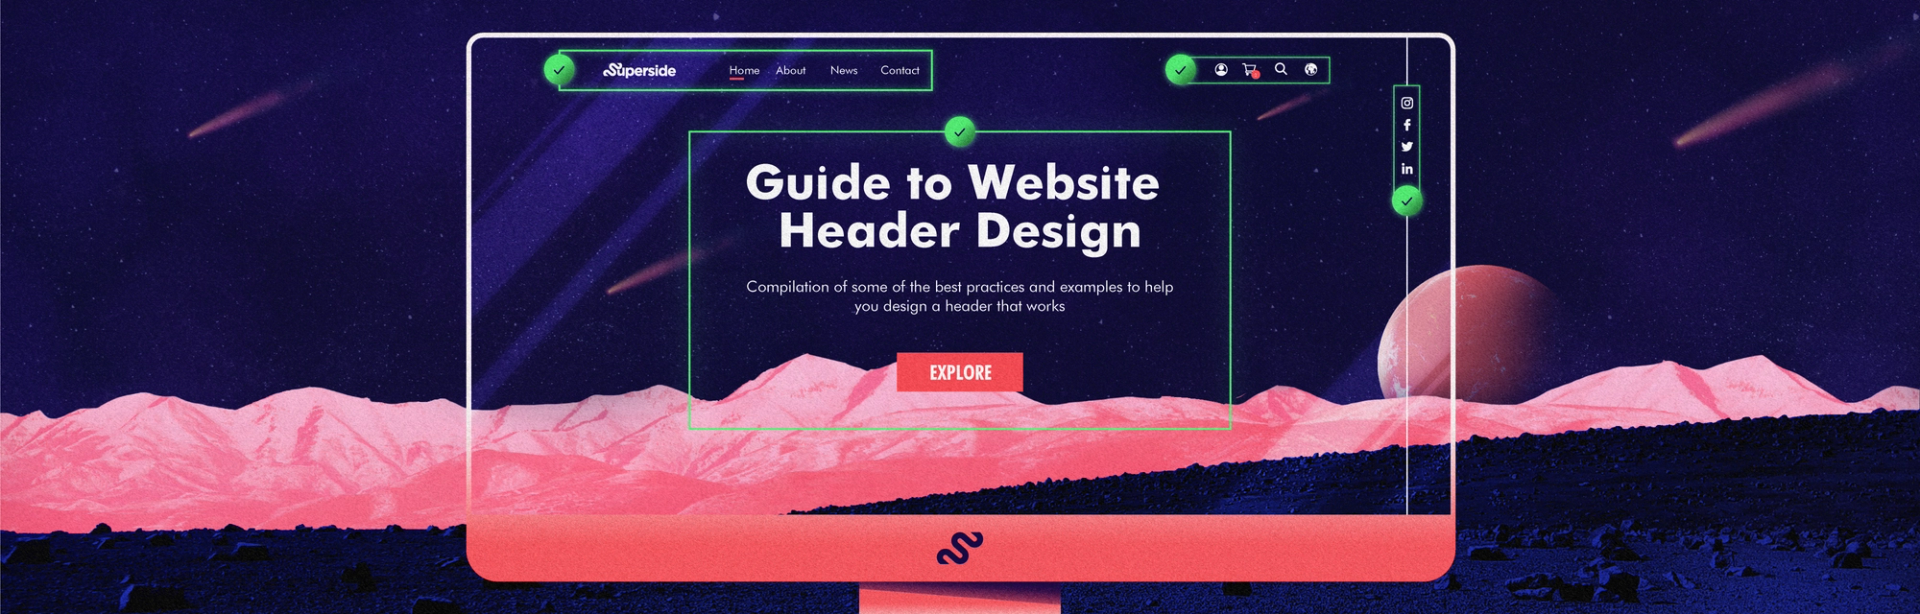 Guide to Creating a Performing Website Header - Superside